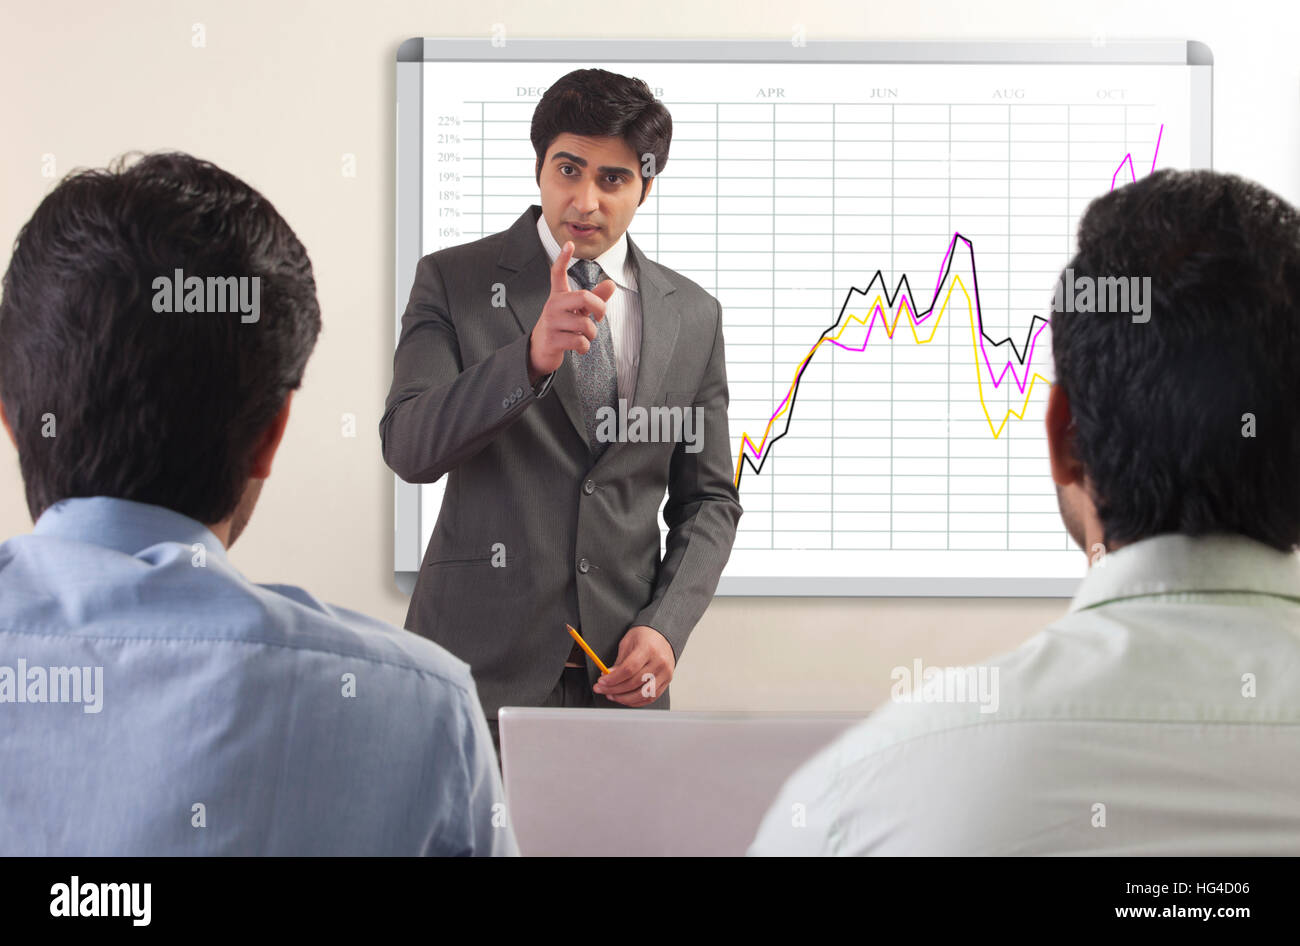 Businessman presenting to colleagues Stock Photo